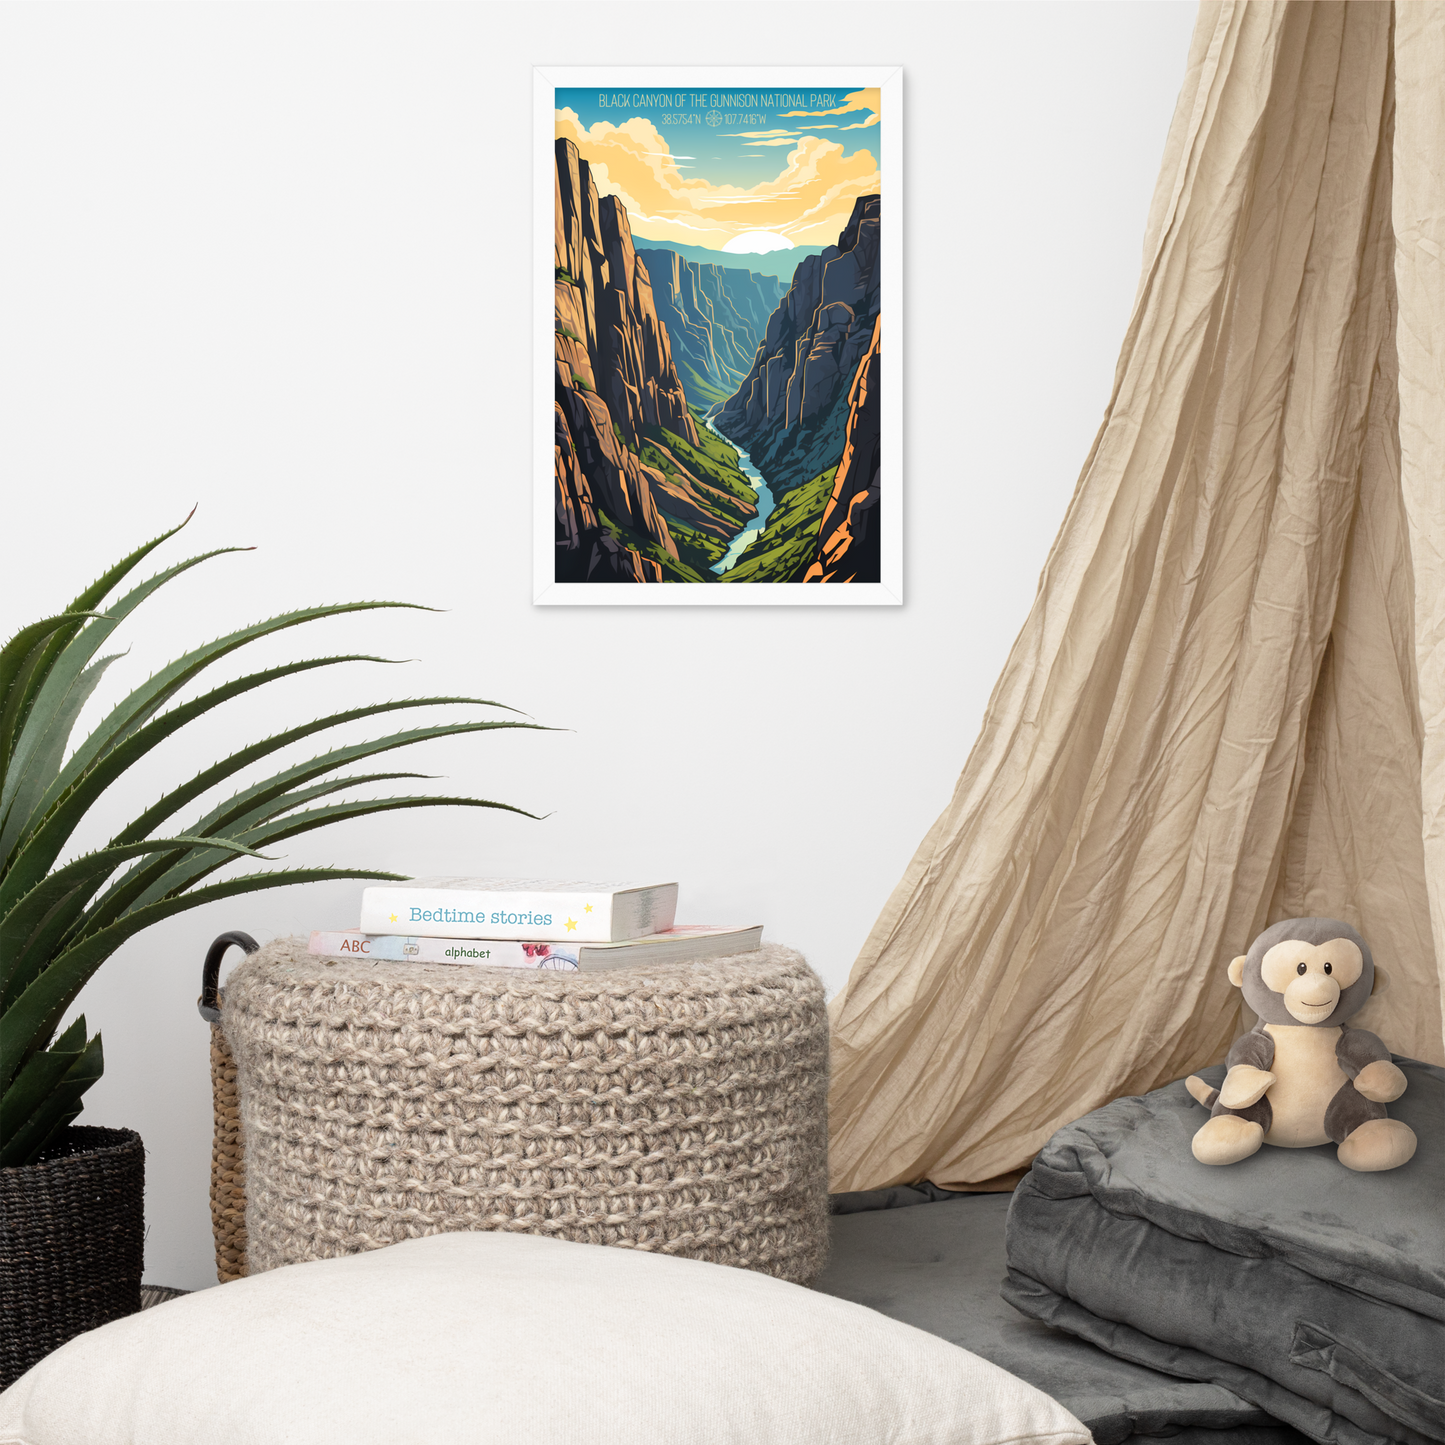 Colorado - Black Canyon of the Gunnison National Park (Framed poster)